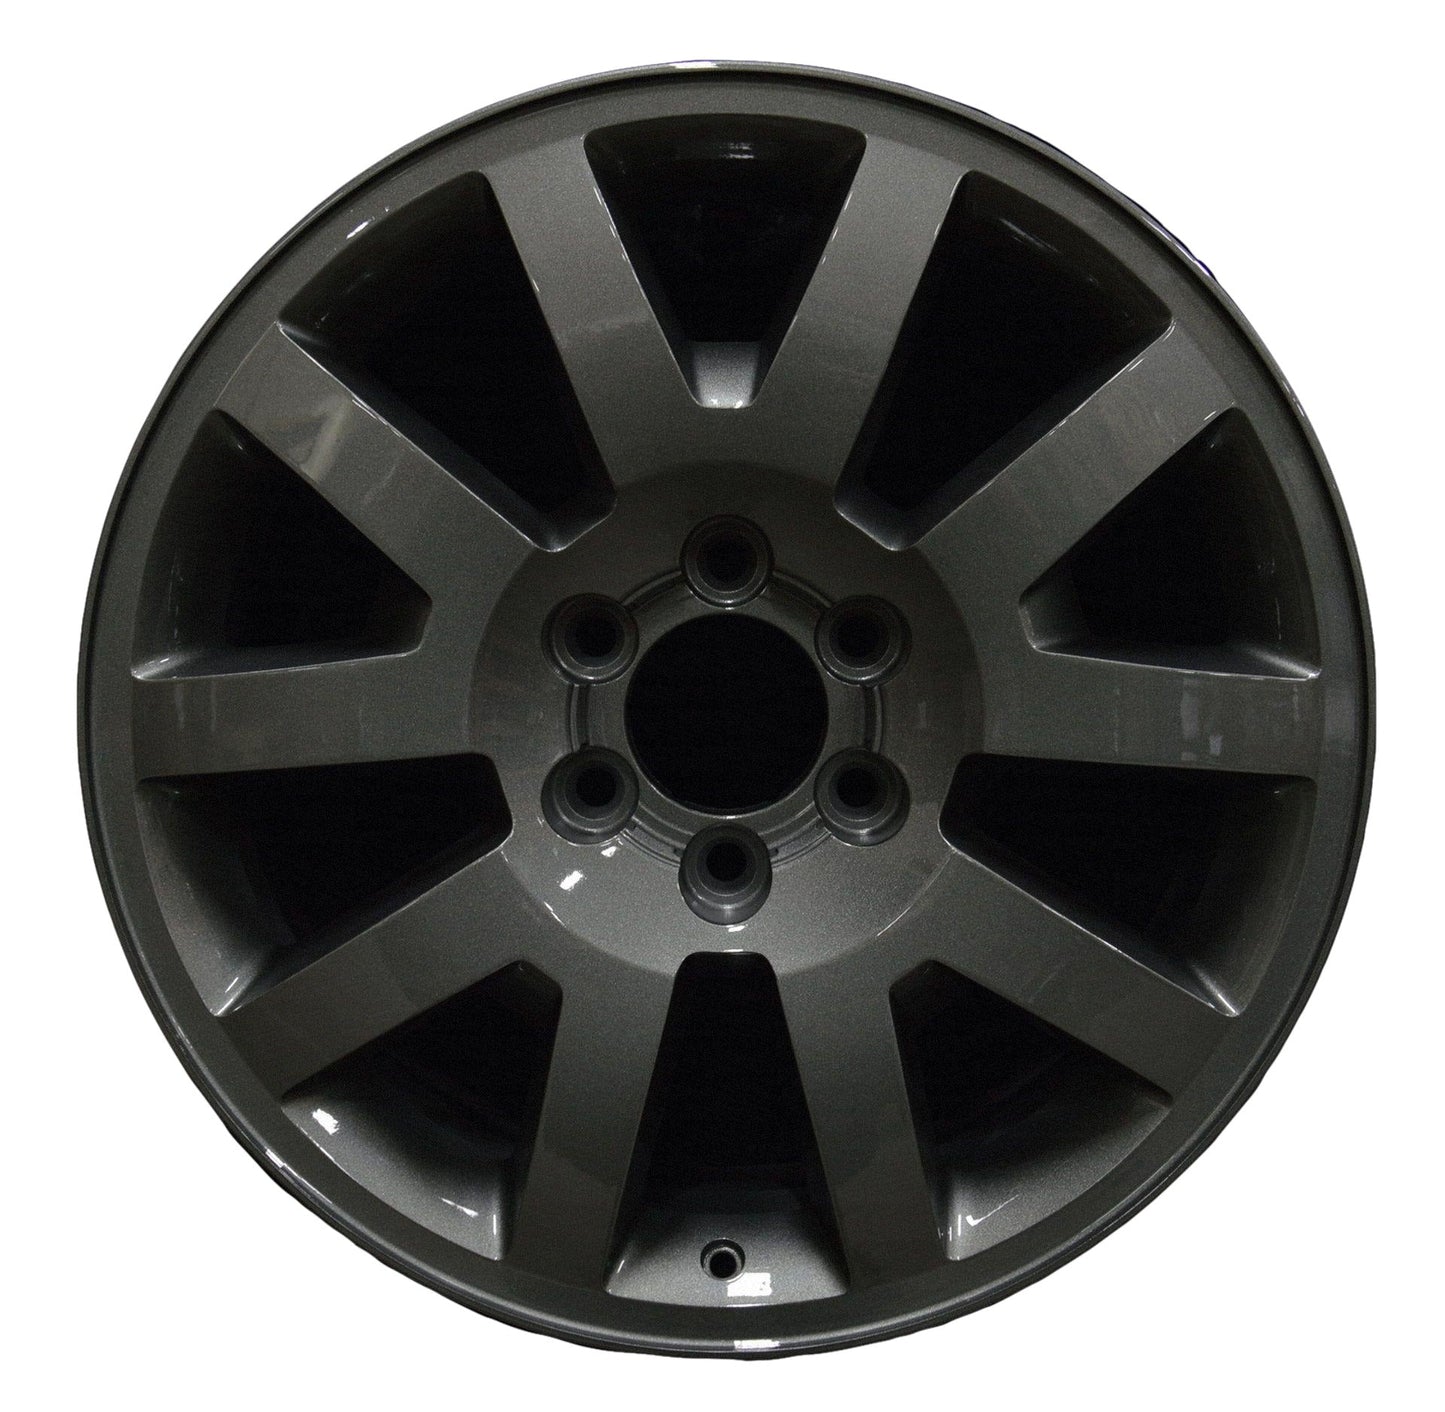 Ford F150 Truck  2011, 2012, 2013, 2014 Factory OEM Car Wheel Size 20x8.5 Alloy WAO.3789.LC46.FF